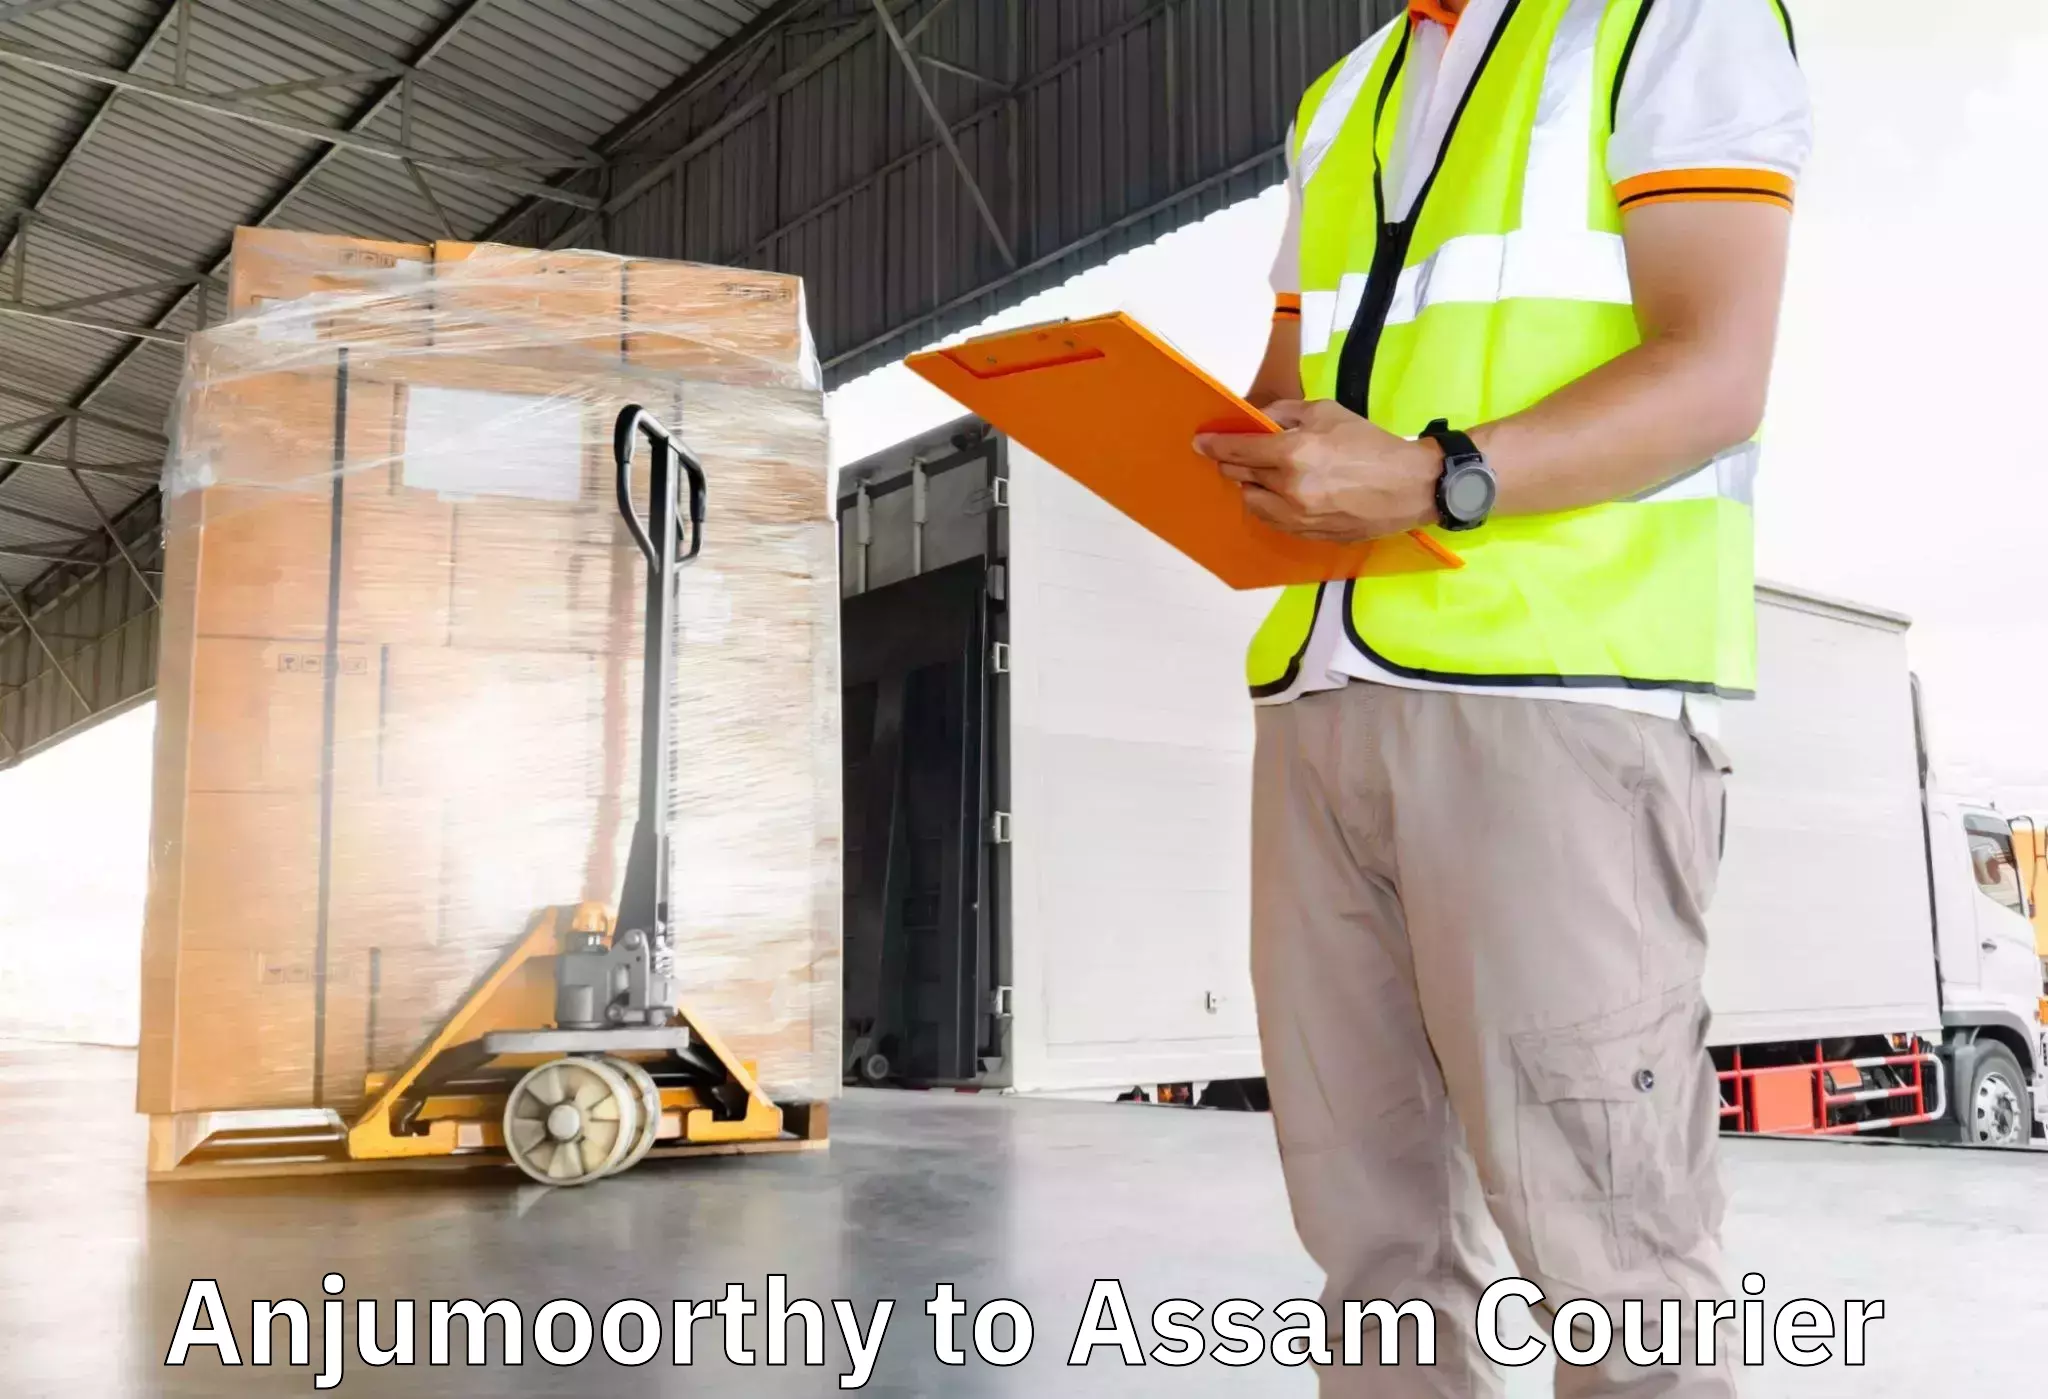 Trusted home movers Anjumoorthy to Teok